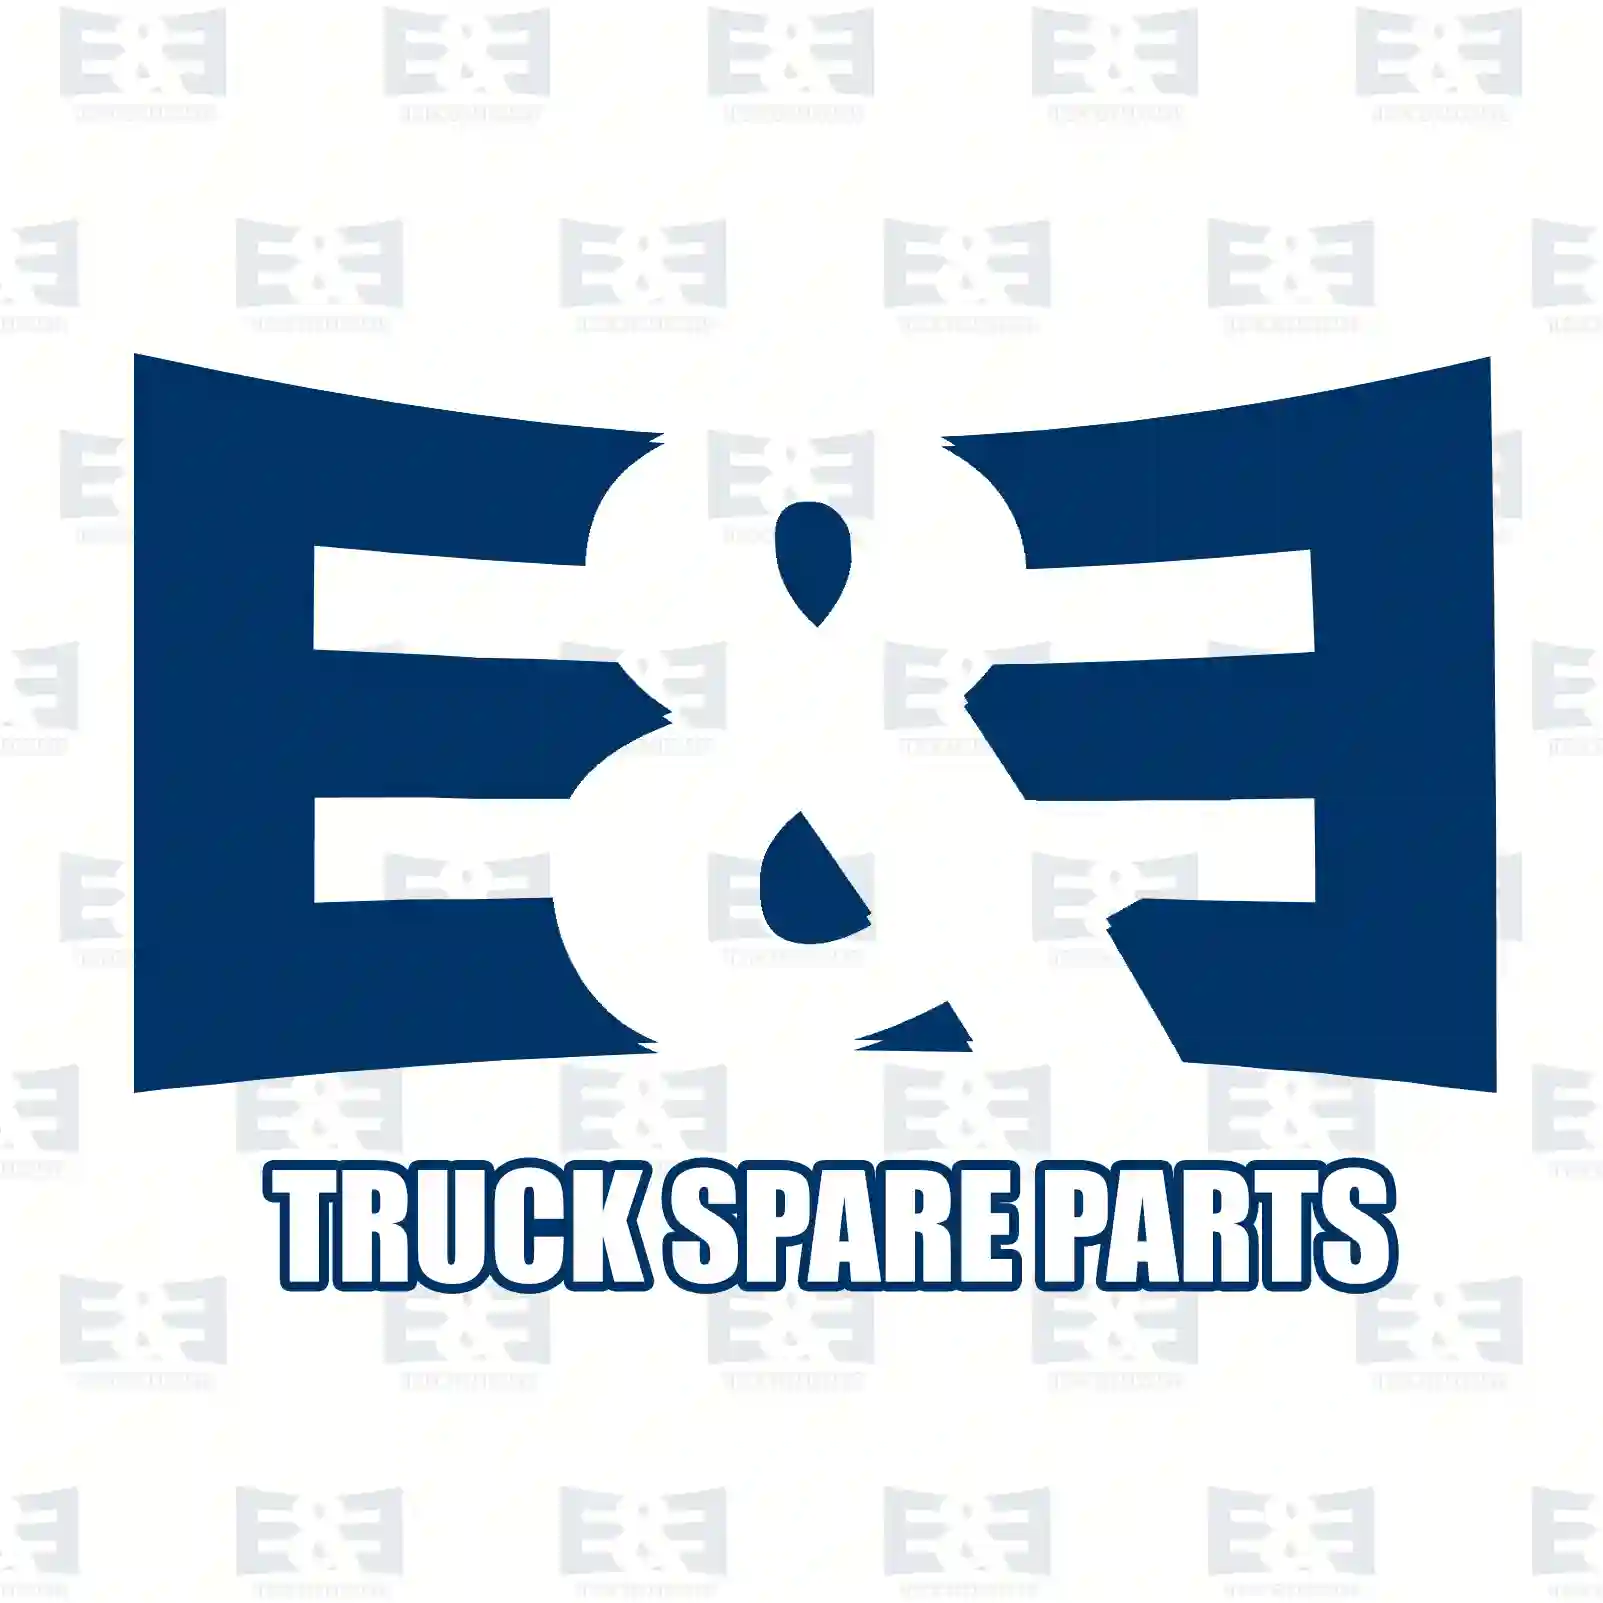  Gasket kit, water pump || E&E Truck Spare Parts | Truck Spare Parts, Auotomotive Spare Parts